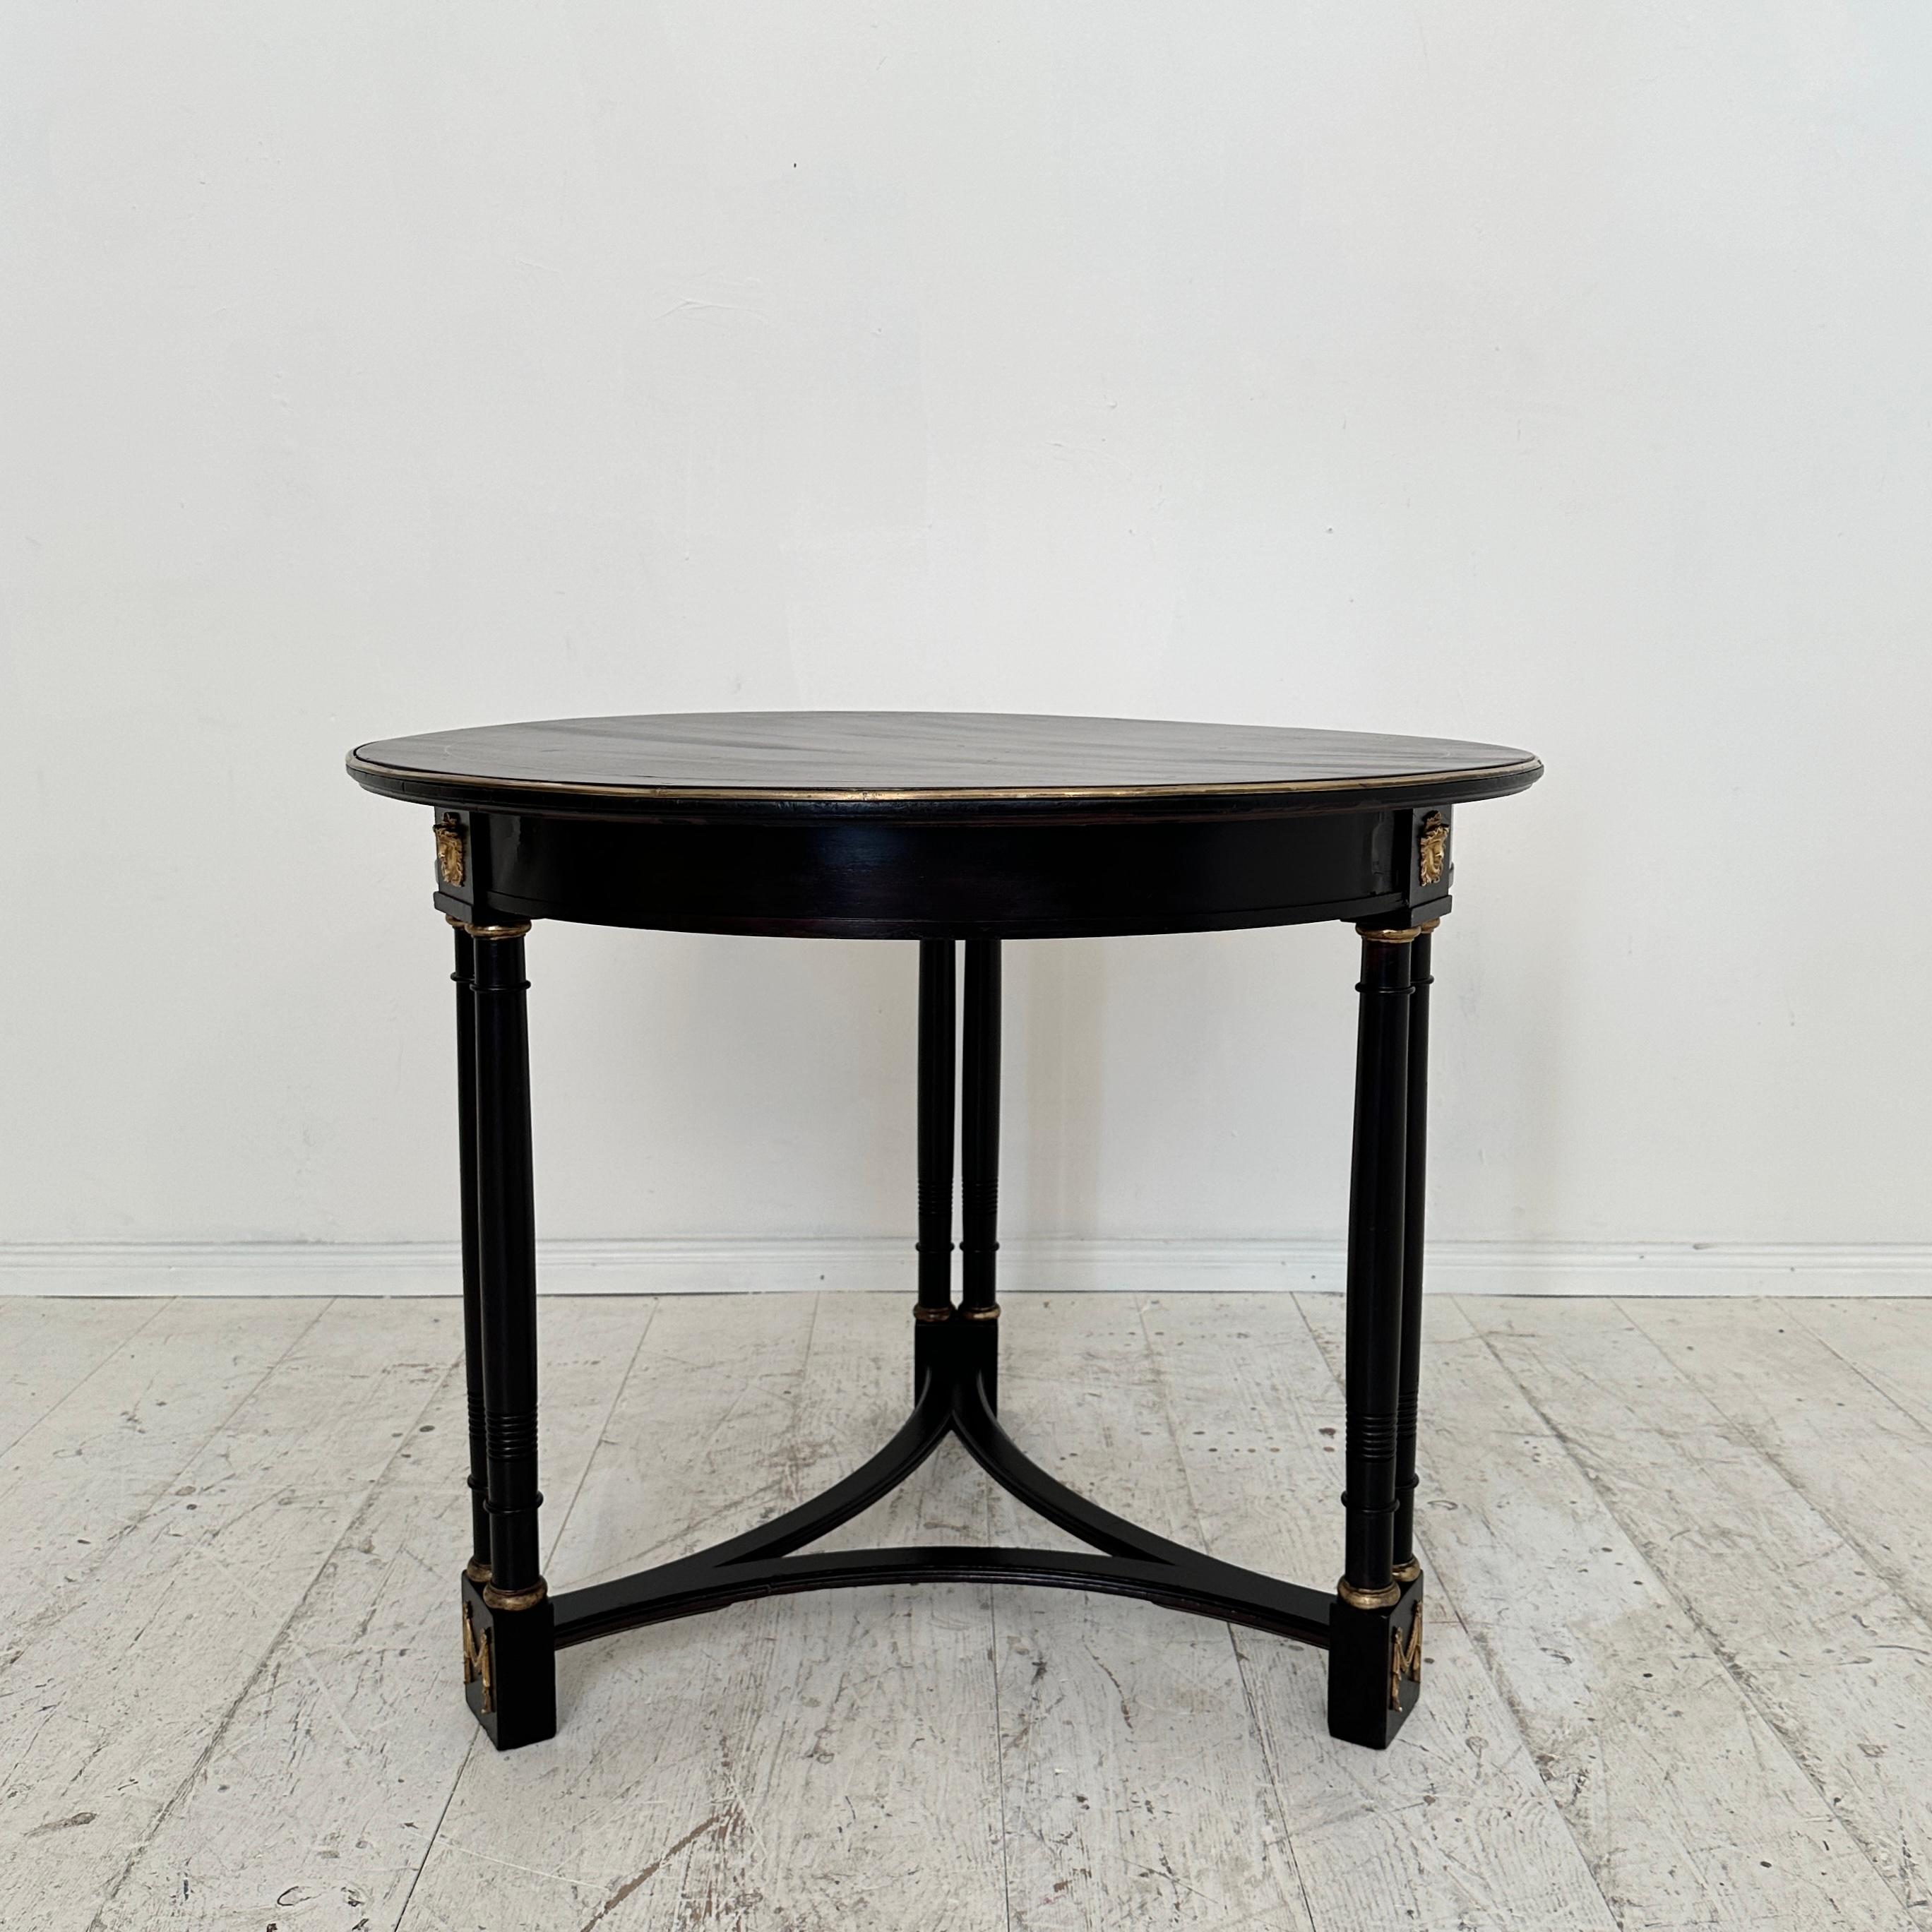 Crafted circa 1870, the 19th Century Black Round Gueridon Table epitomizes the lavish elegance of the Empire style. With its sleek black hue and graceful curves, it stands as a testament to the opulence of the era. Adorned with intricate detailing